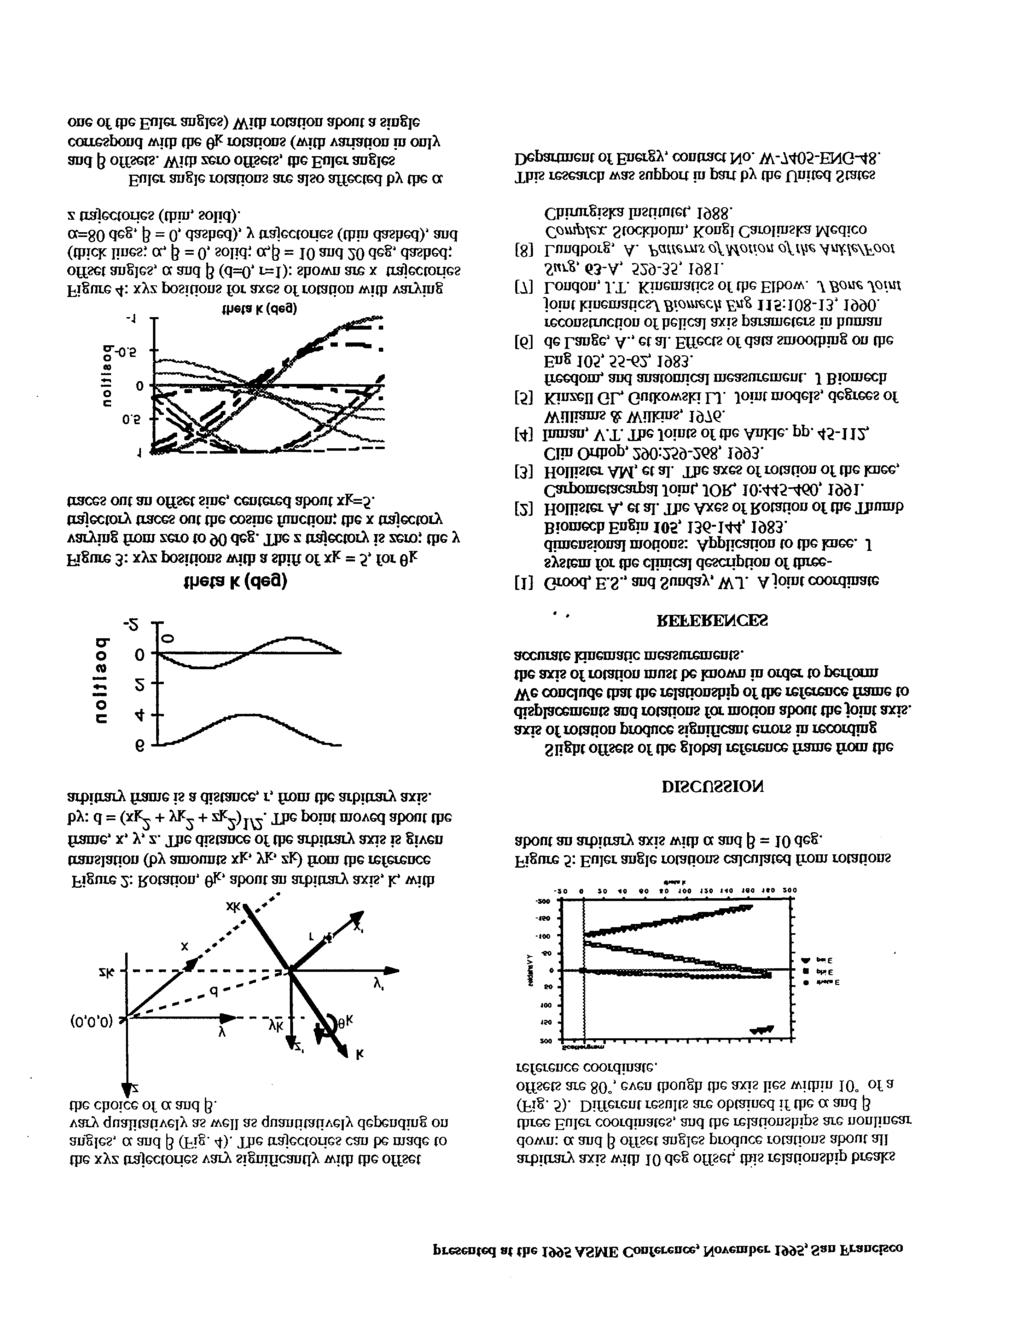 presented at the 1995 ASME Conference, November 1995, San Francisco the xyz trajectories vary significantly with the offset angles, a and ~ @lg. 4).